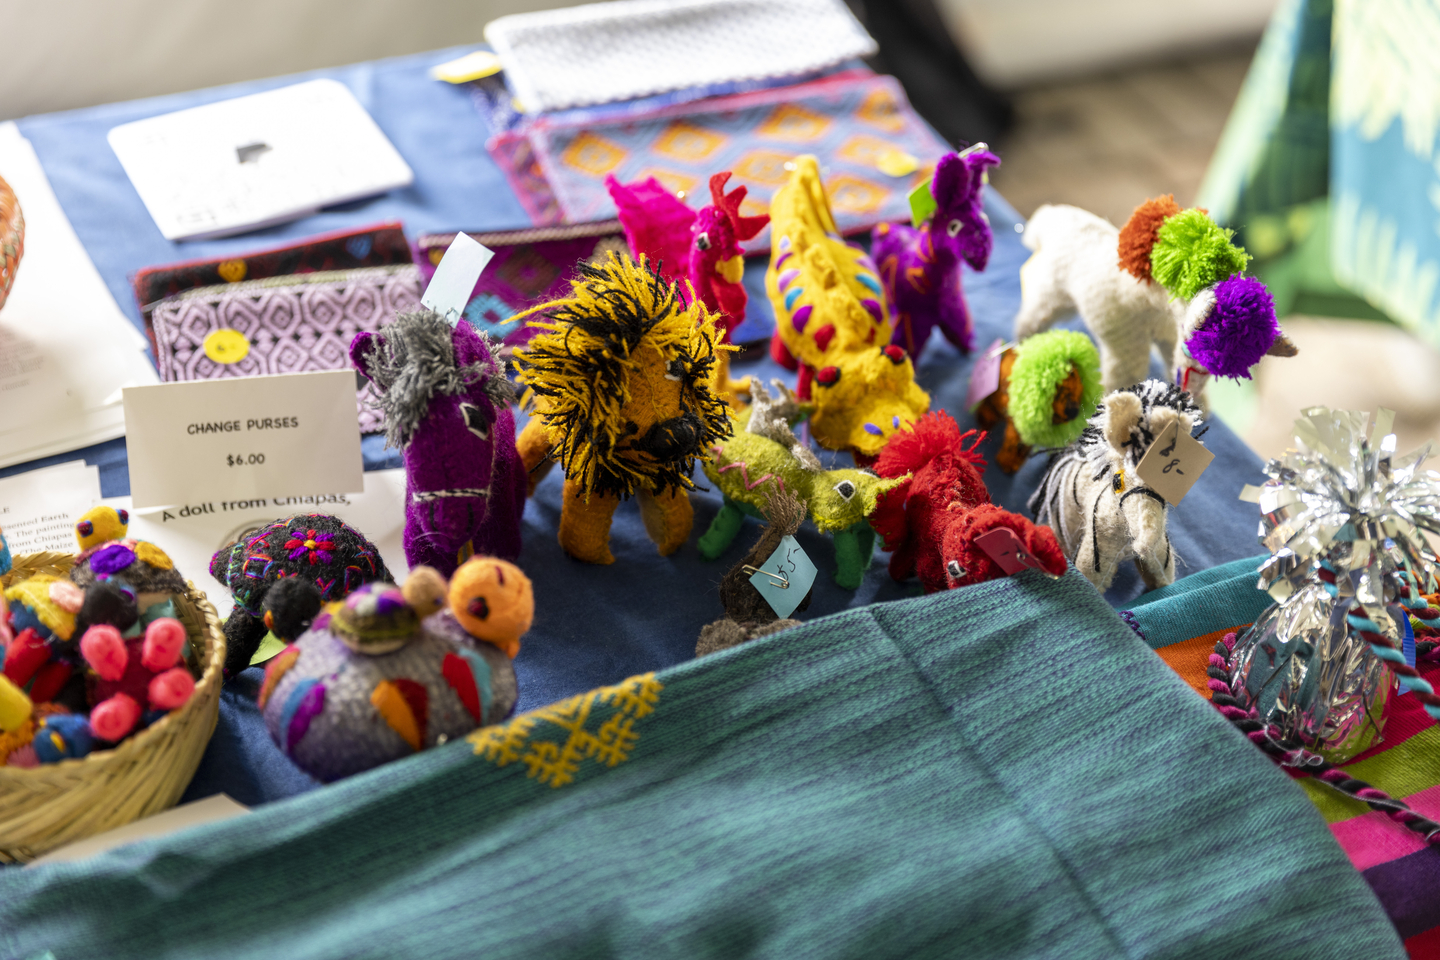 Colorful handmade fabric animals and items displayed on a table